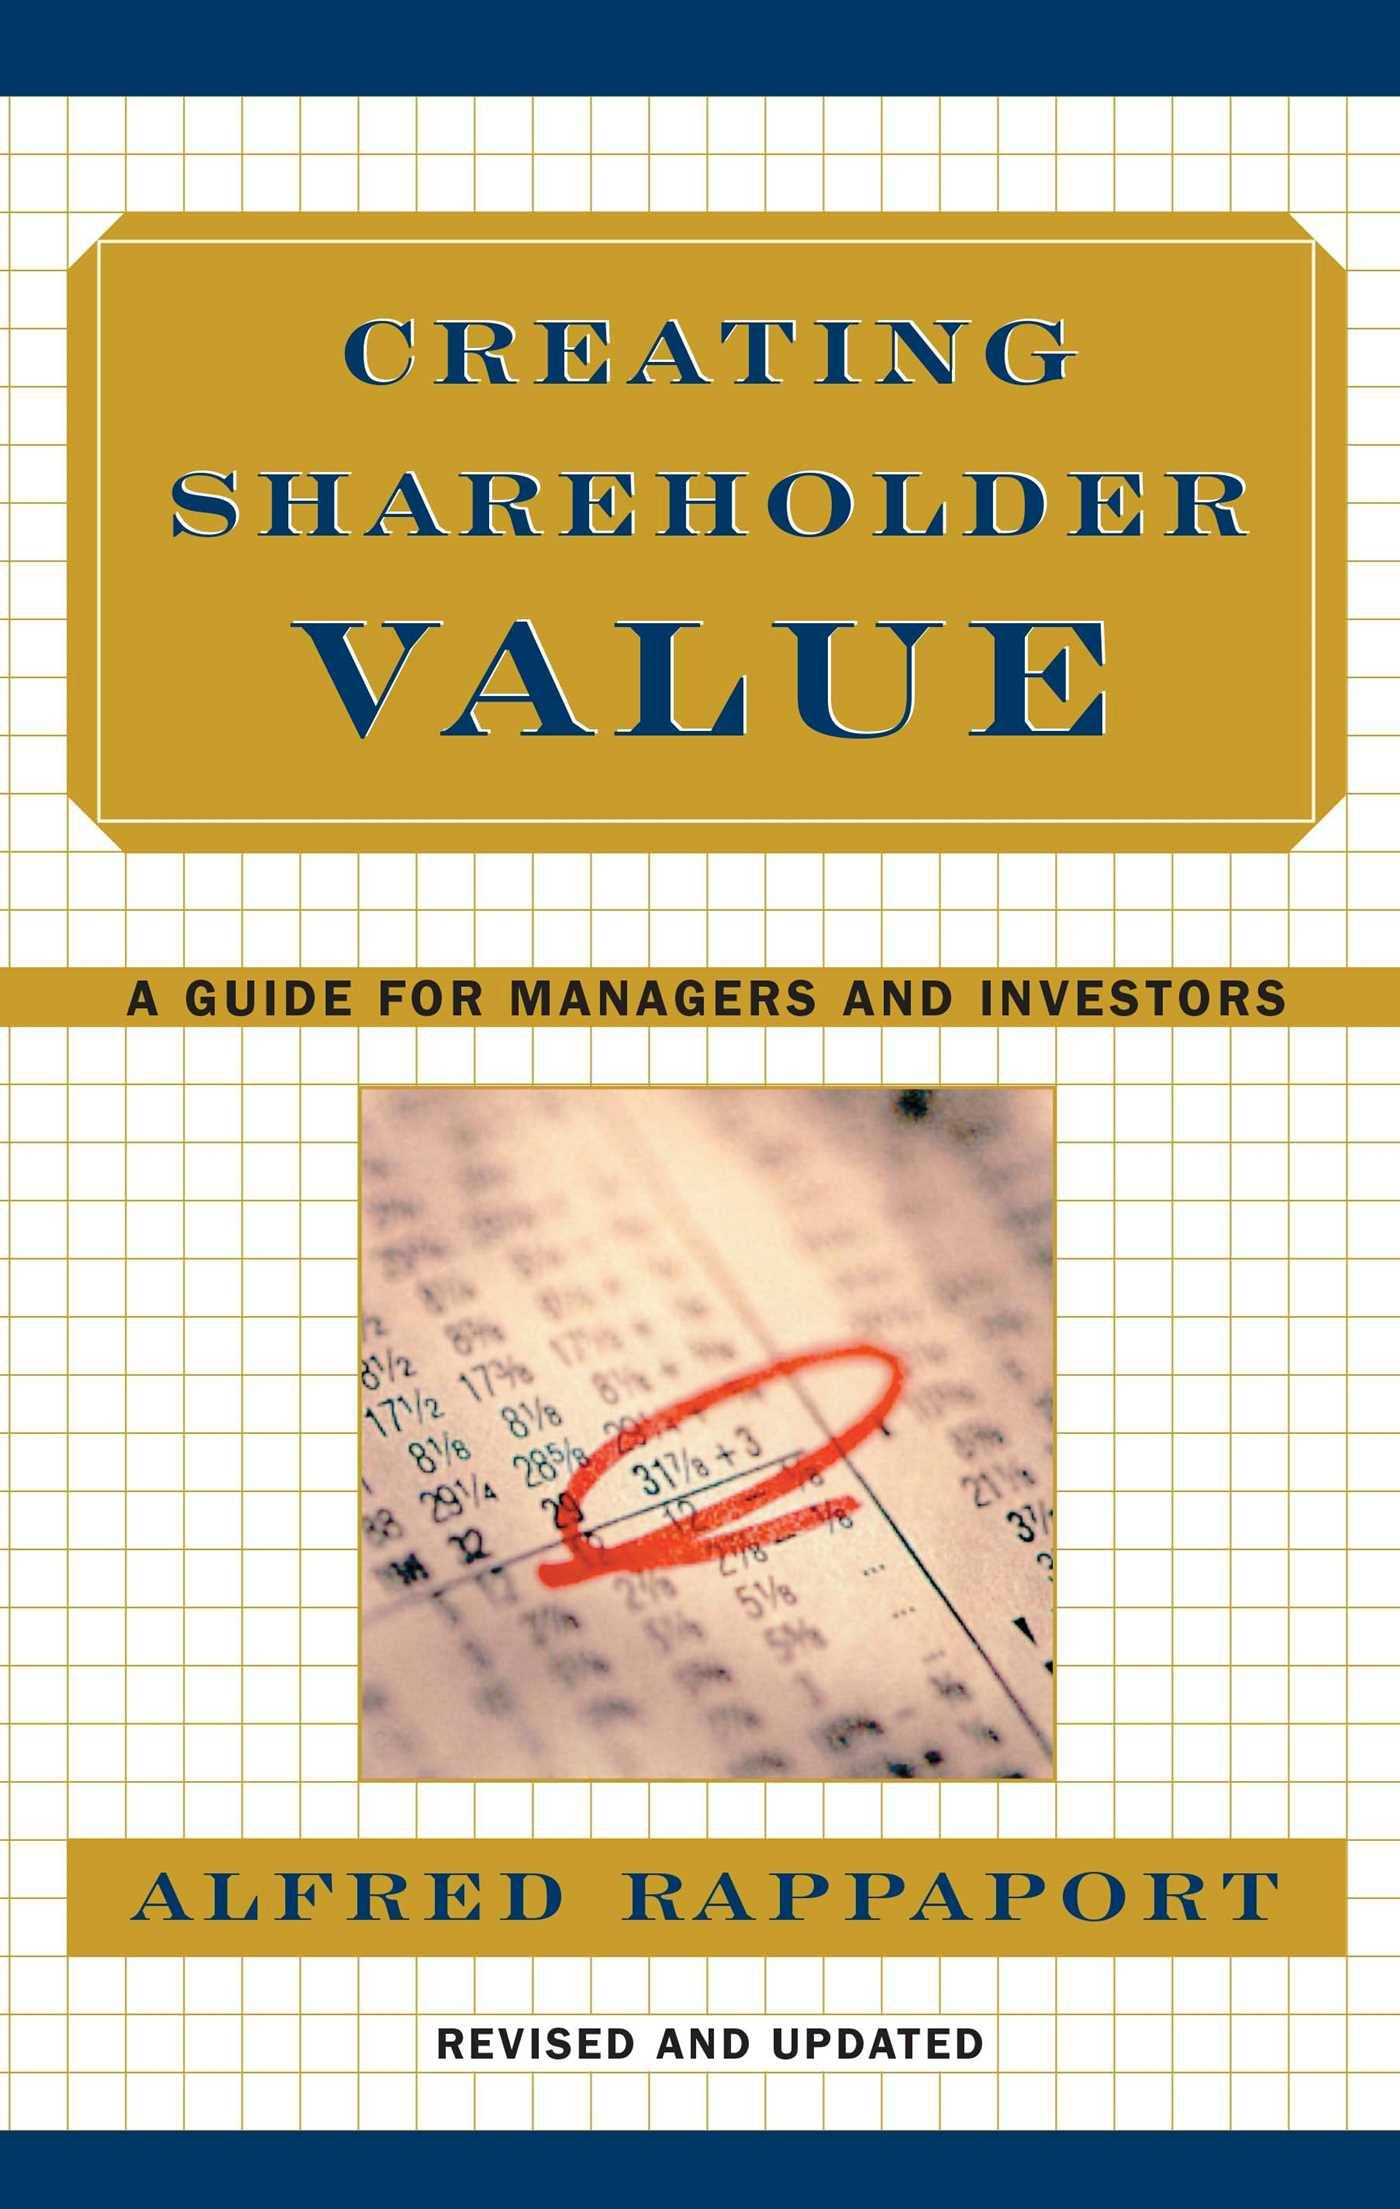 Creating Shareholder Value: A Guide For Managers And Investors - Alfred Rappaport